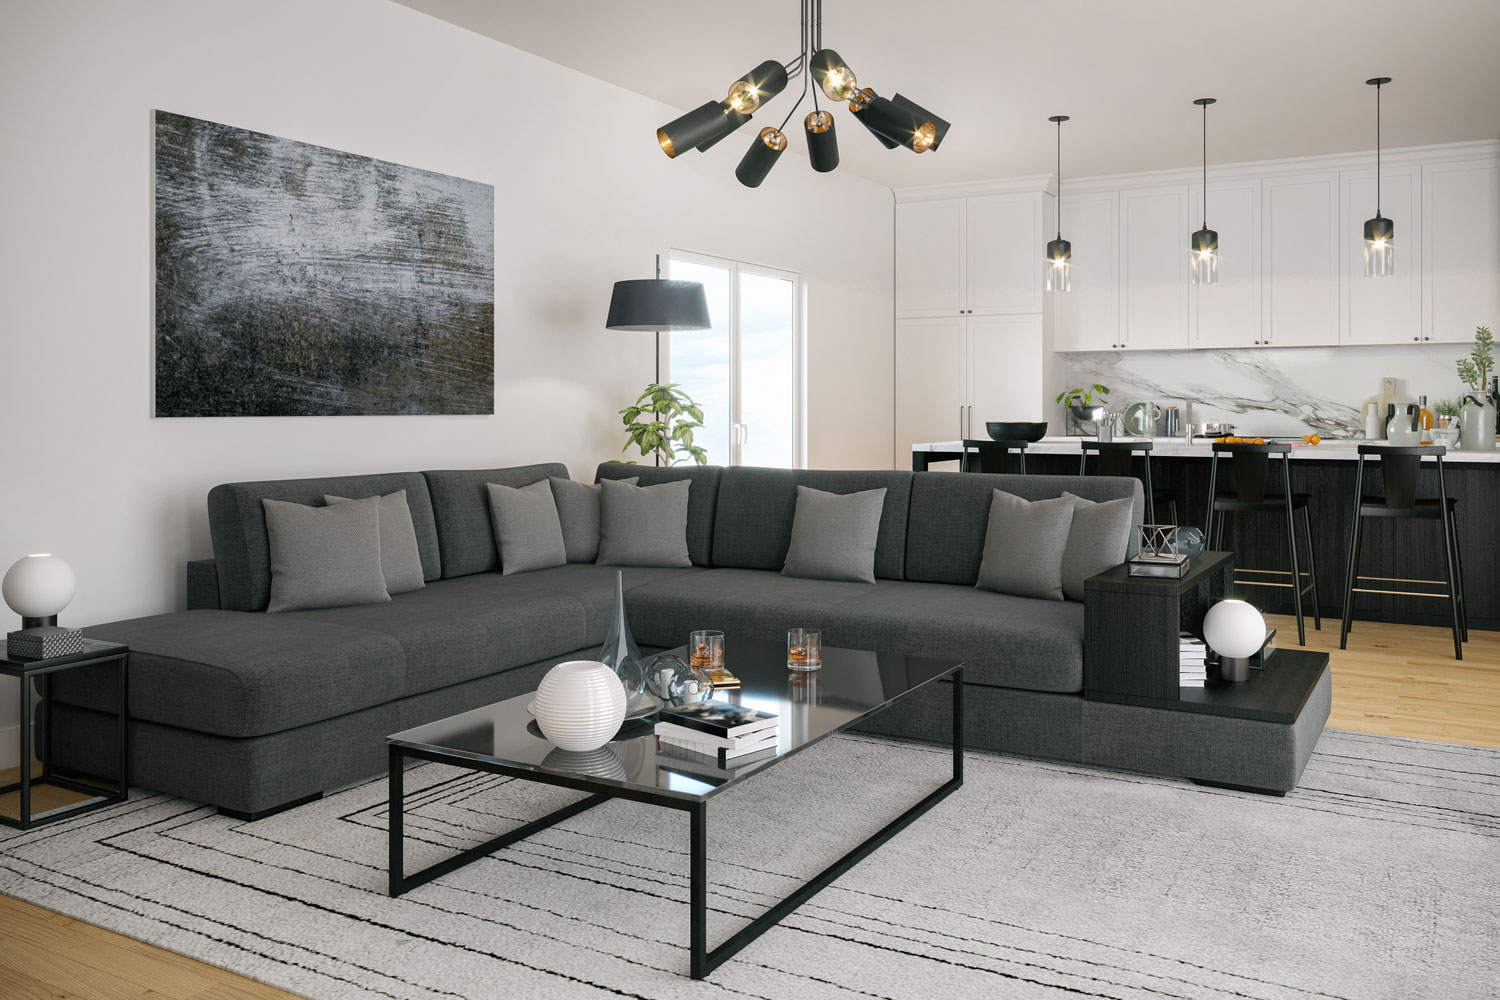 15 Great Black Sofa Color Schemes You Should See